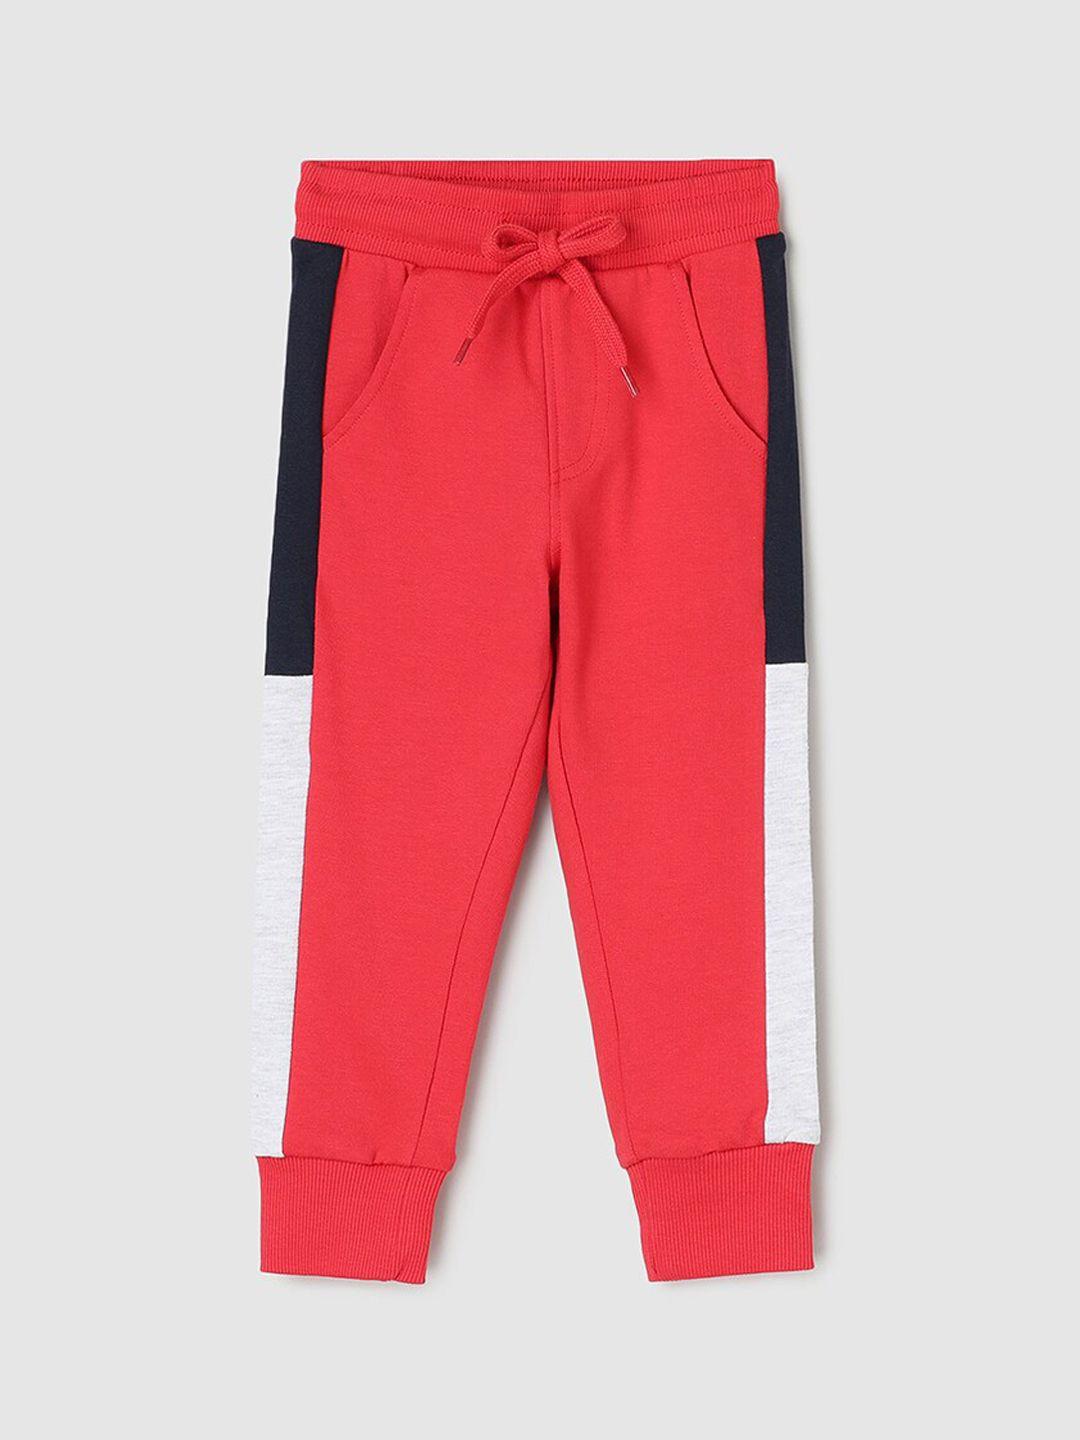 max boys side panel detail pure cotton joggers